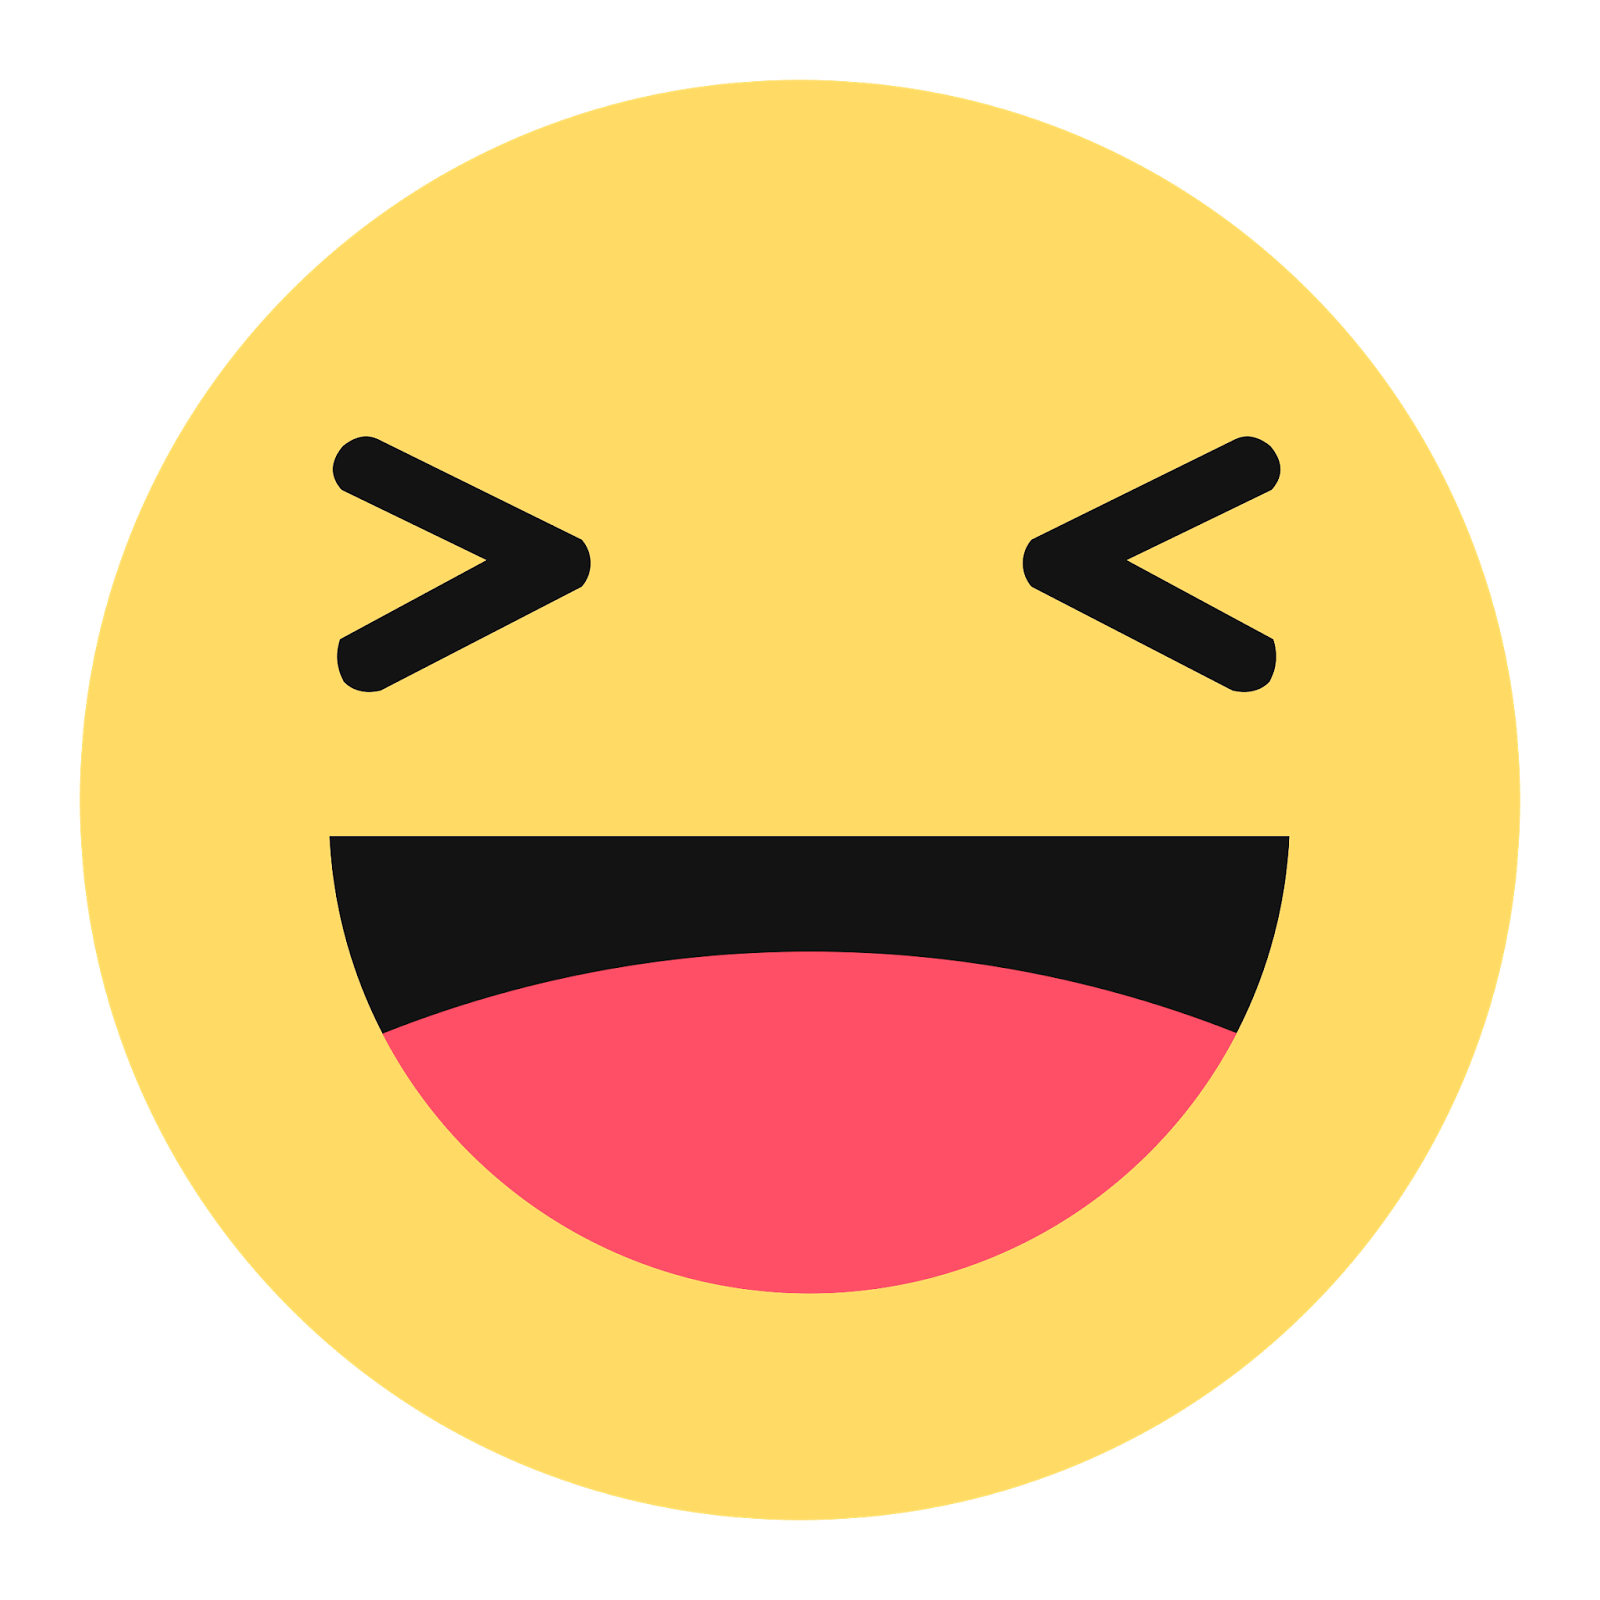 Emoticon Button Facebook Like Download Free Image PNG Image